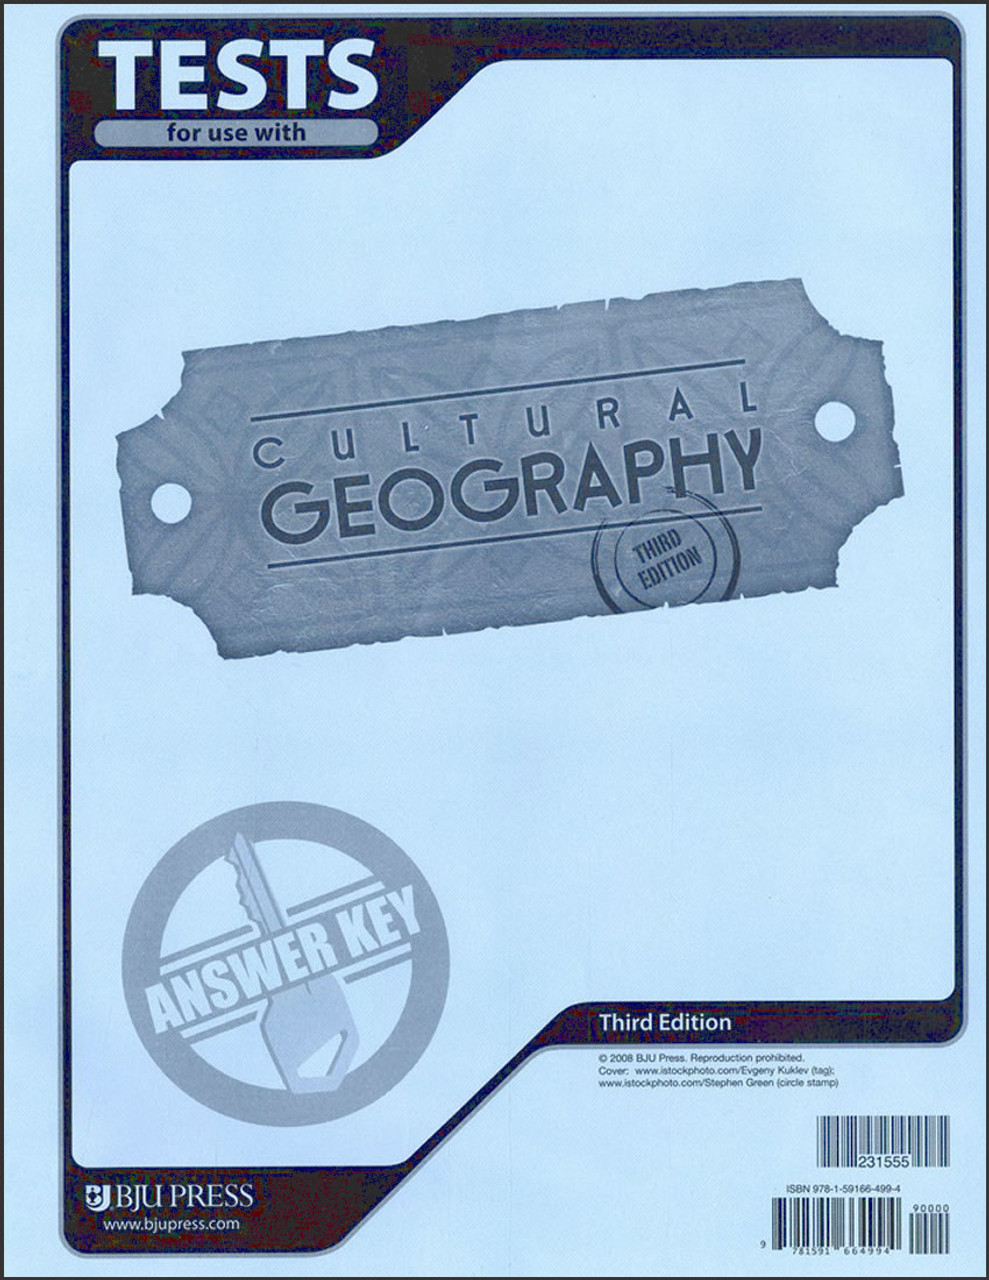 Cultural Geography, 3rd edition - Tests Answer Key